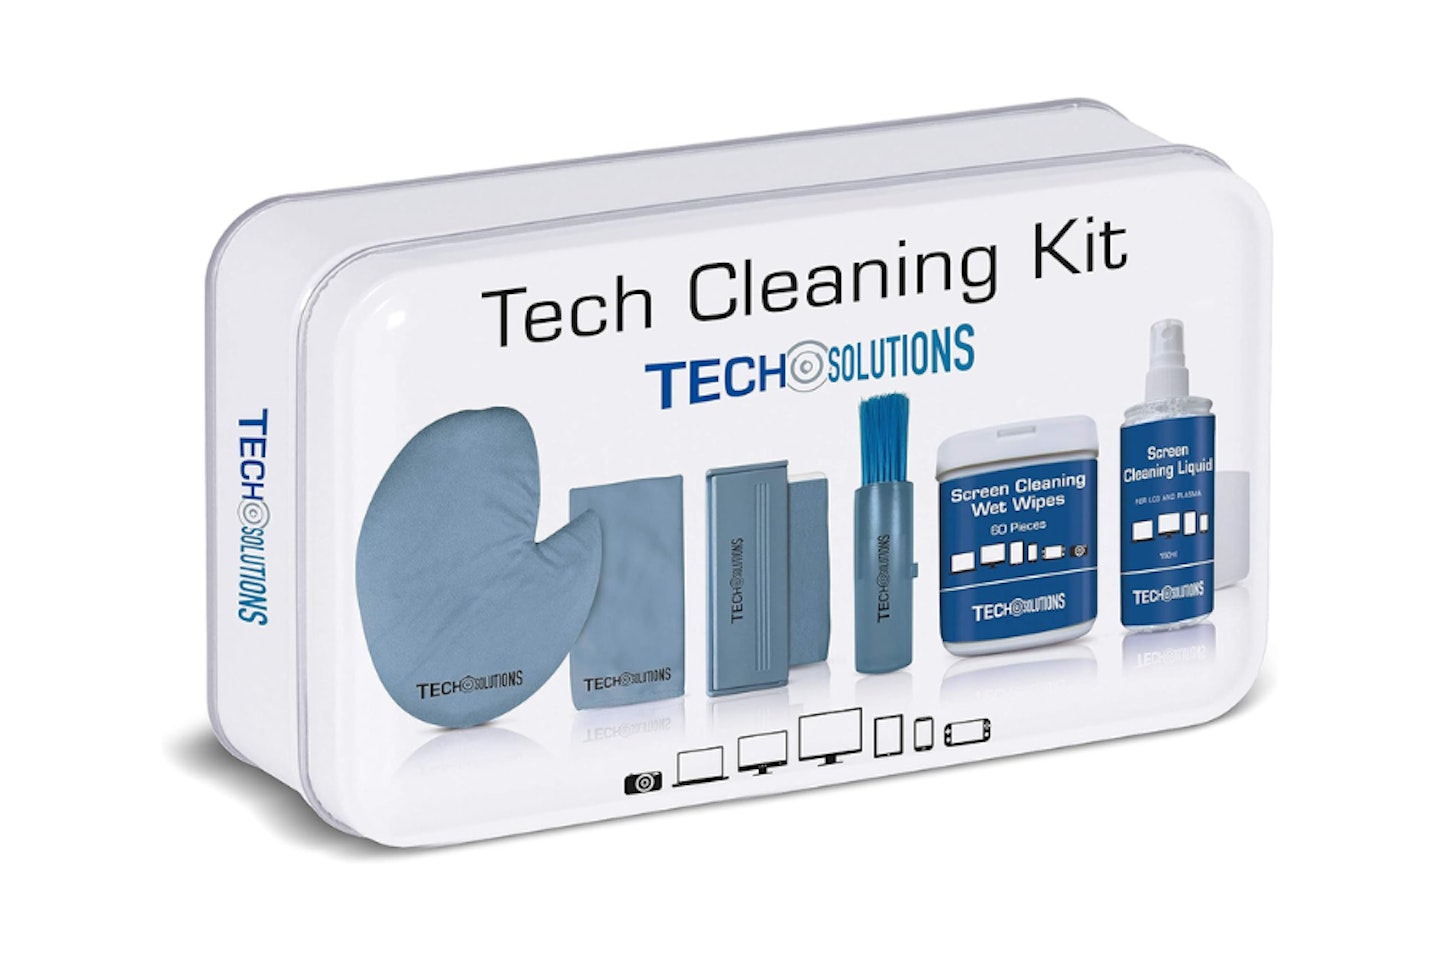 Tech Solutions Antibacterial Tech Cleaning Kit - one of the best TV screen cleaner products